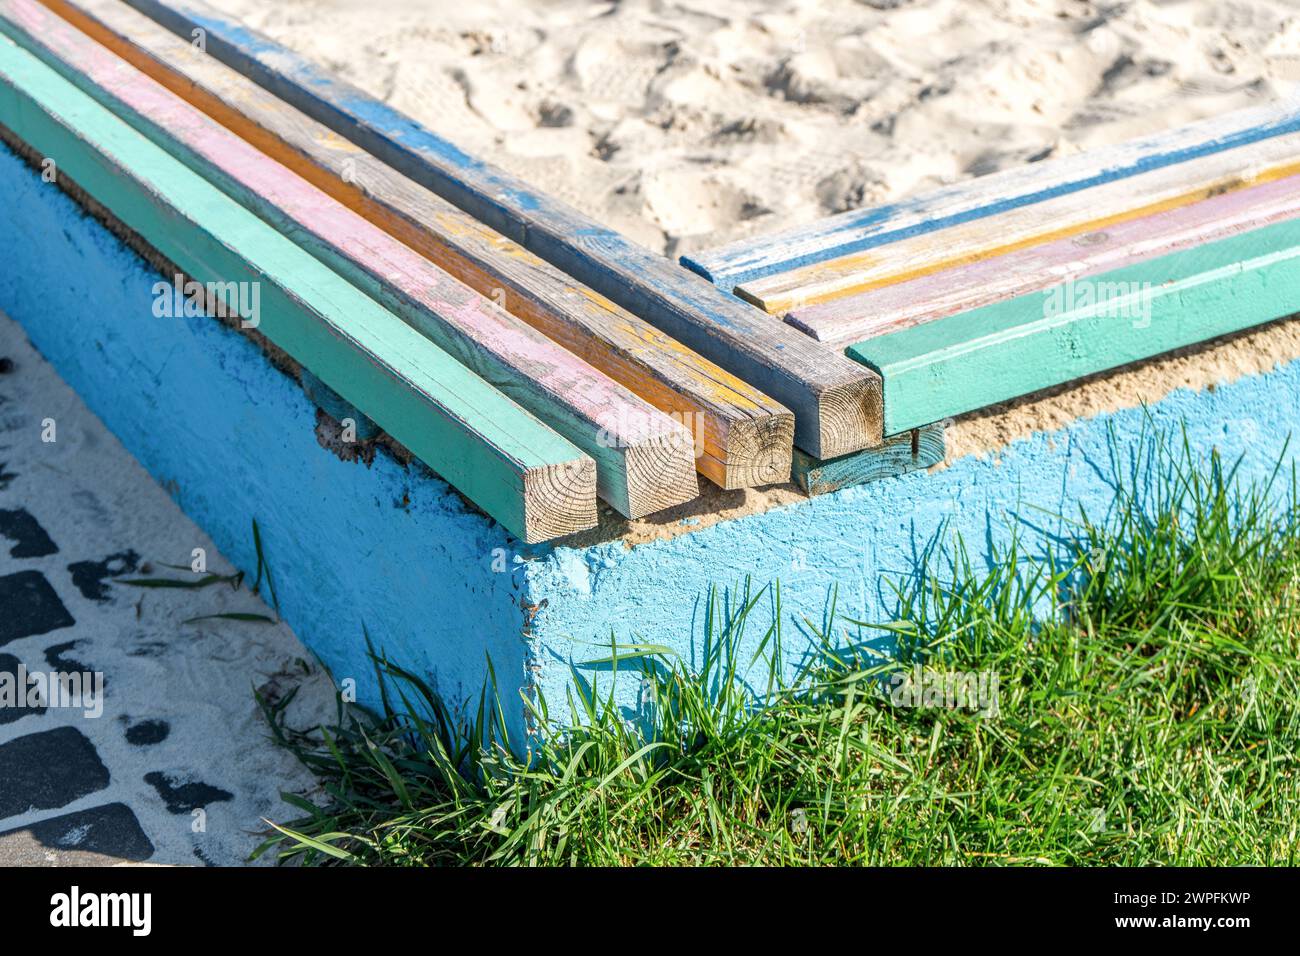 Concrete barrier with colorful wooden bars serving as seats, surrounding a children's sandpit near lush lawn on sunny day Stock Photo